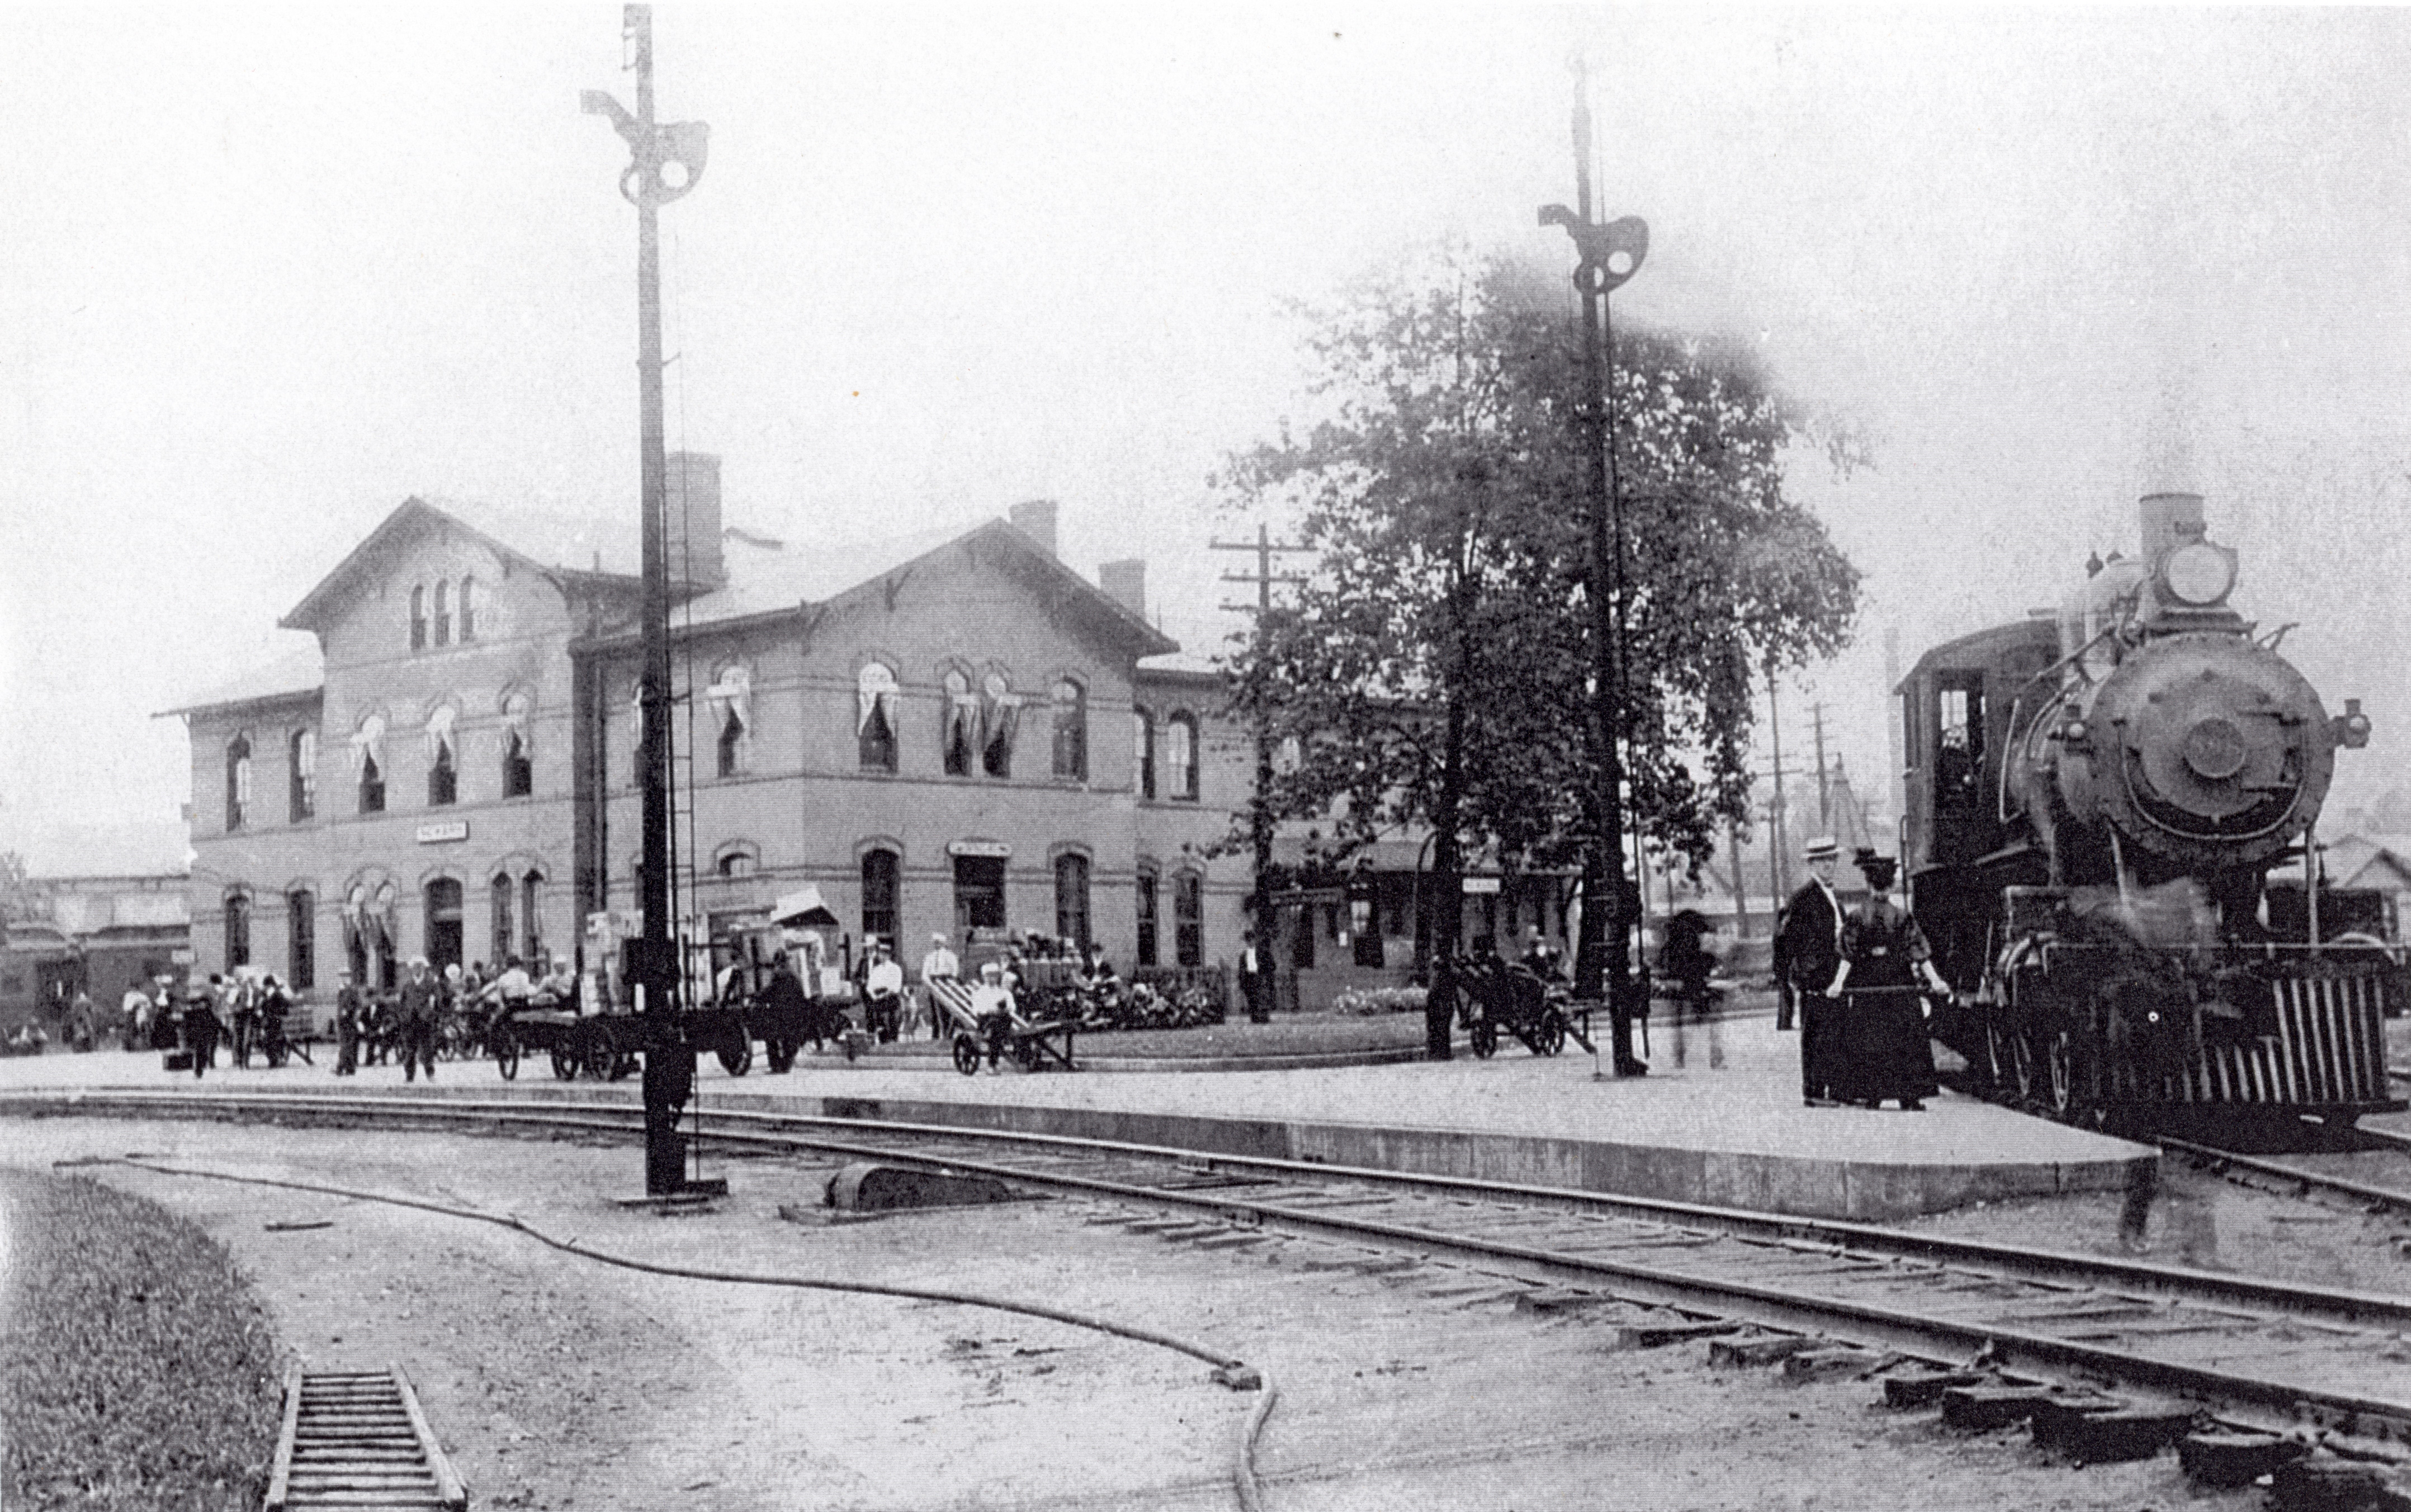 The B&O passenger depot was located near The Works, at the confluence of the railroad tracks on Yearly Street south of East Main Street.